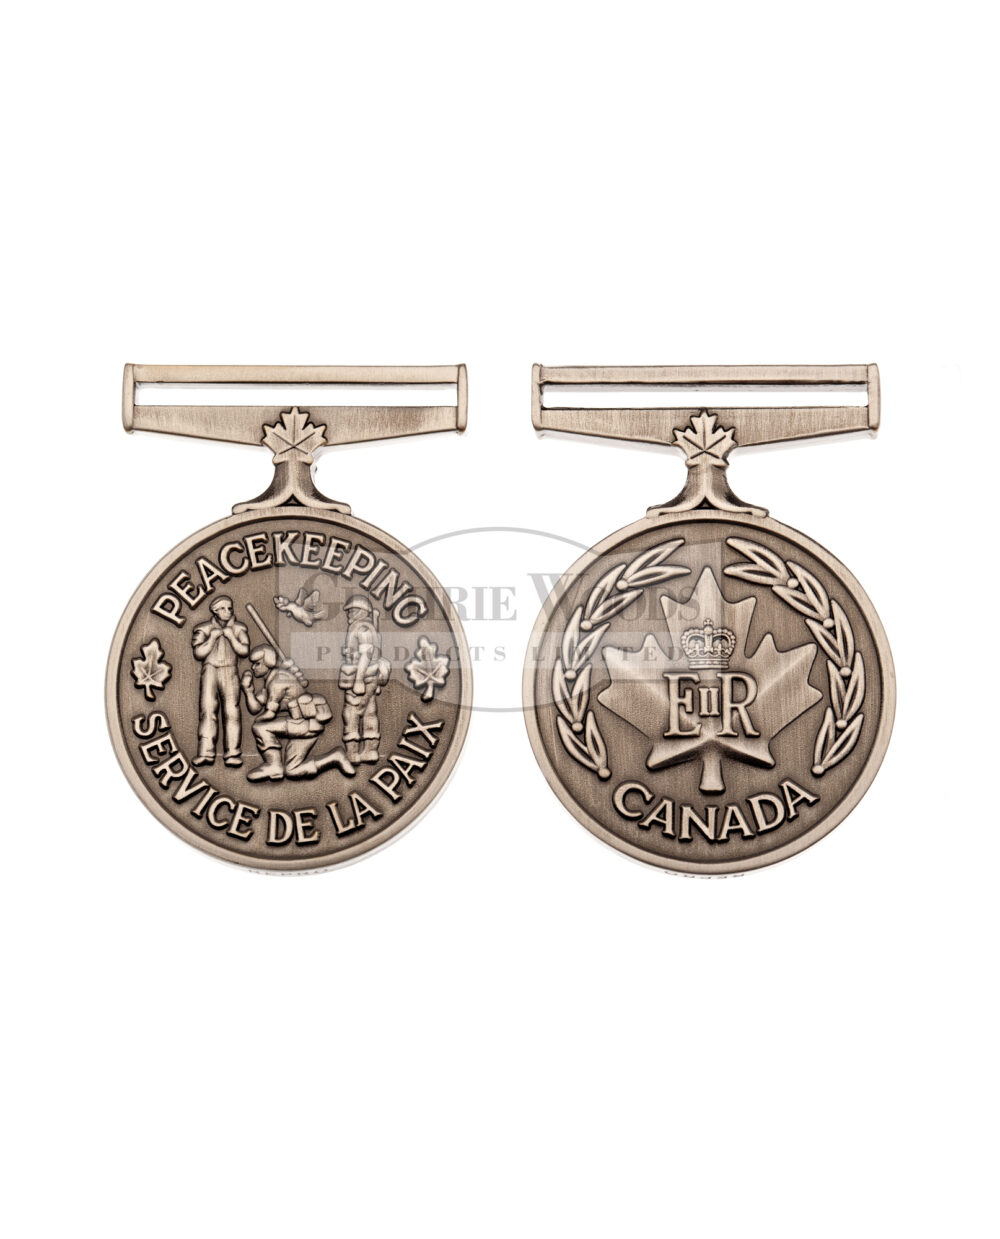 Canadian Peacekeeping Service (CPSM) - Medal